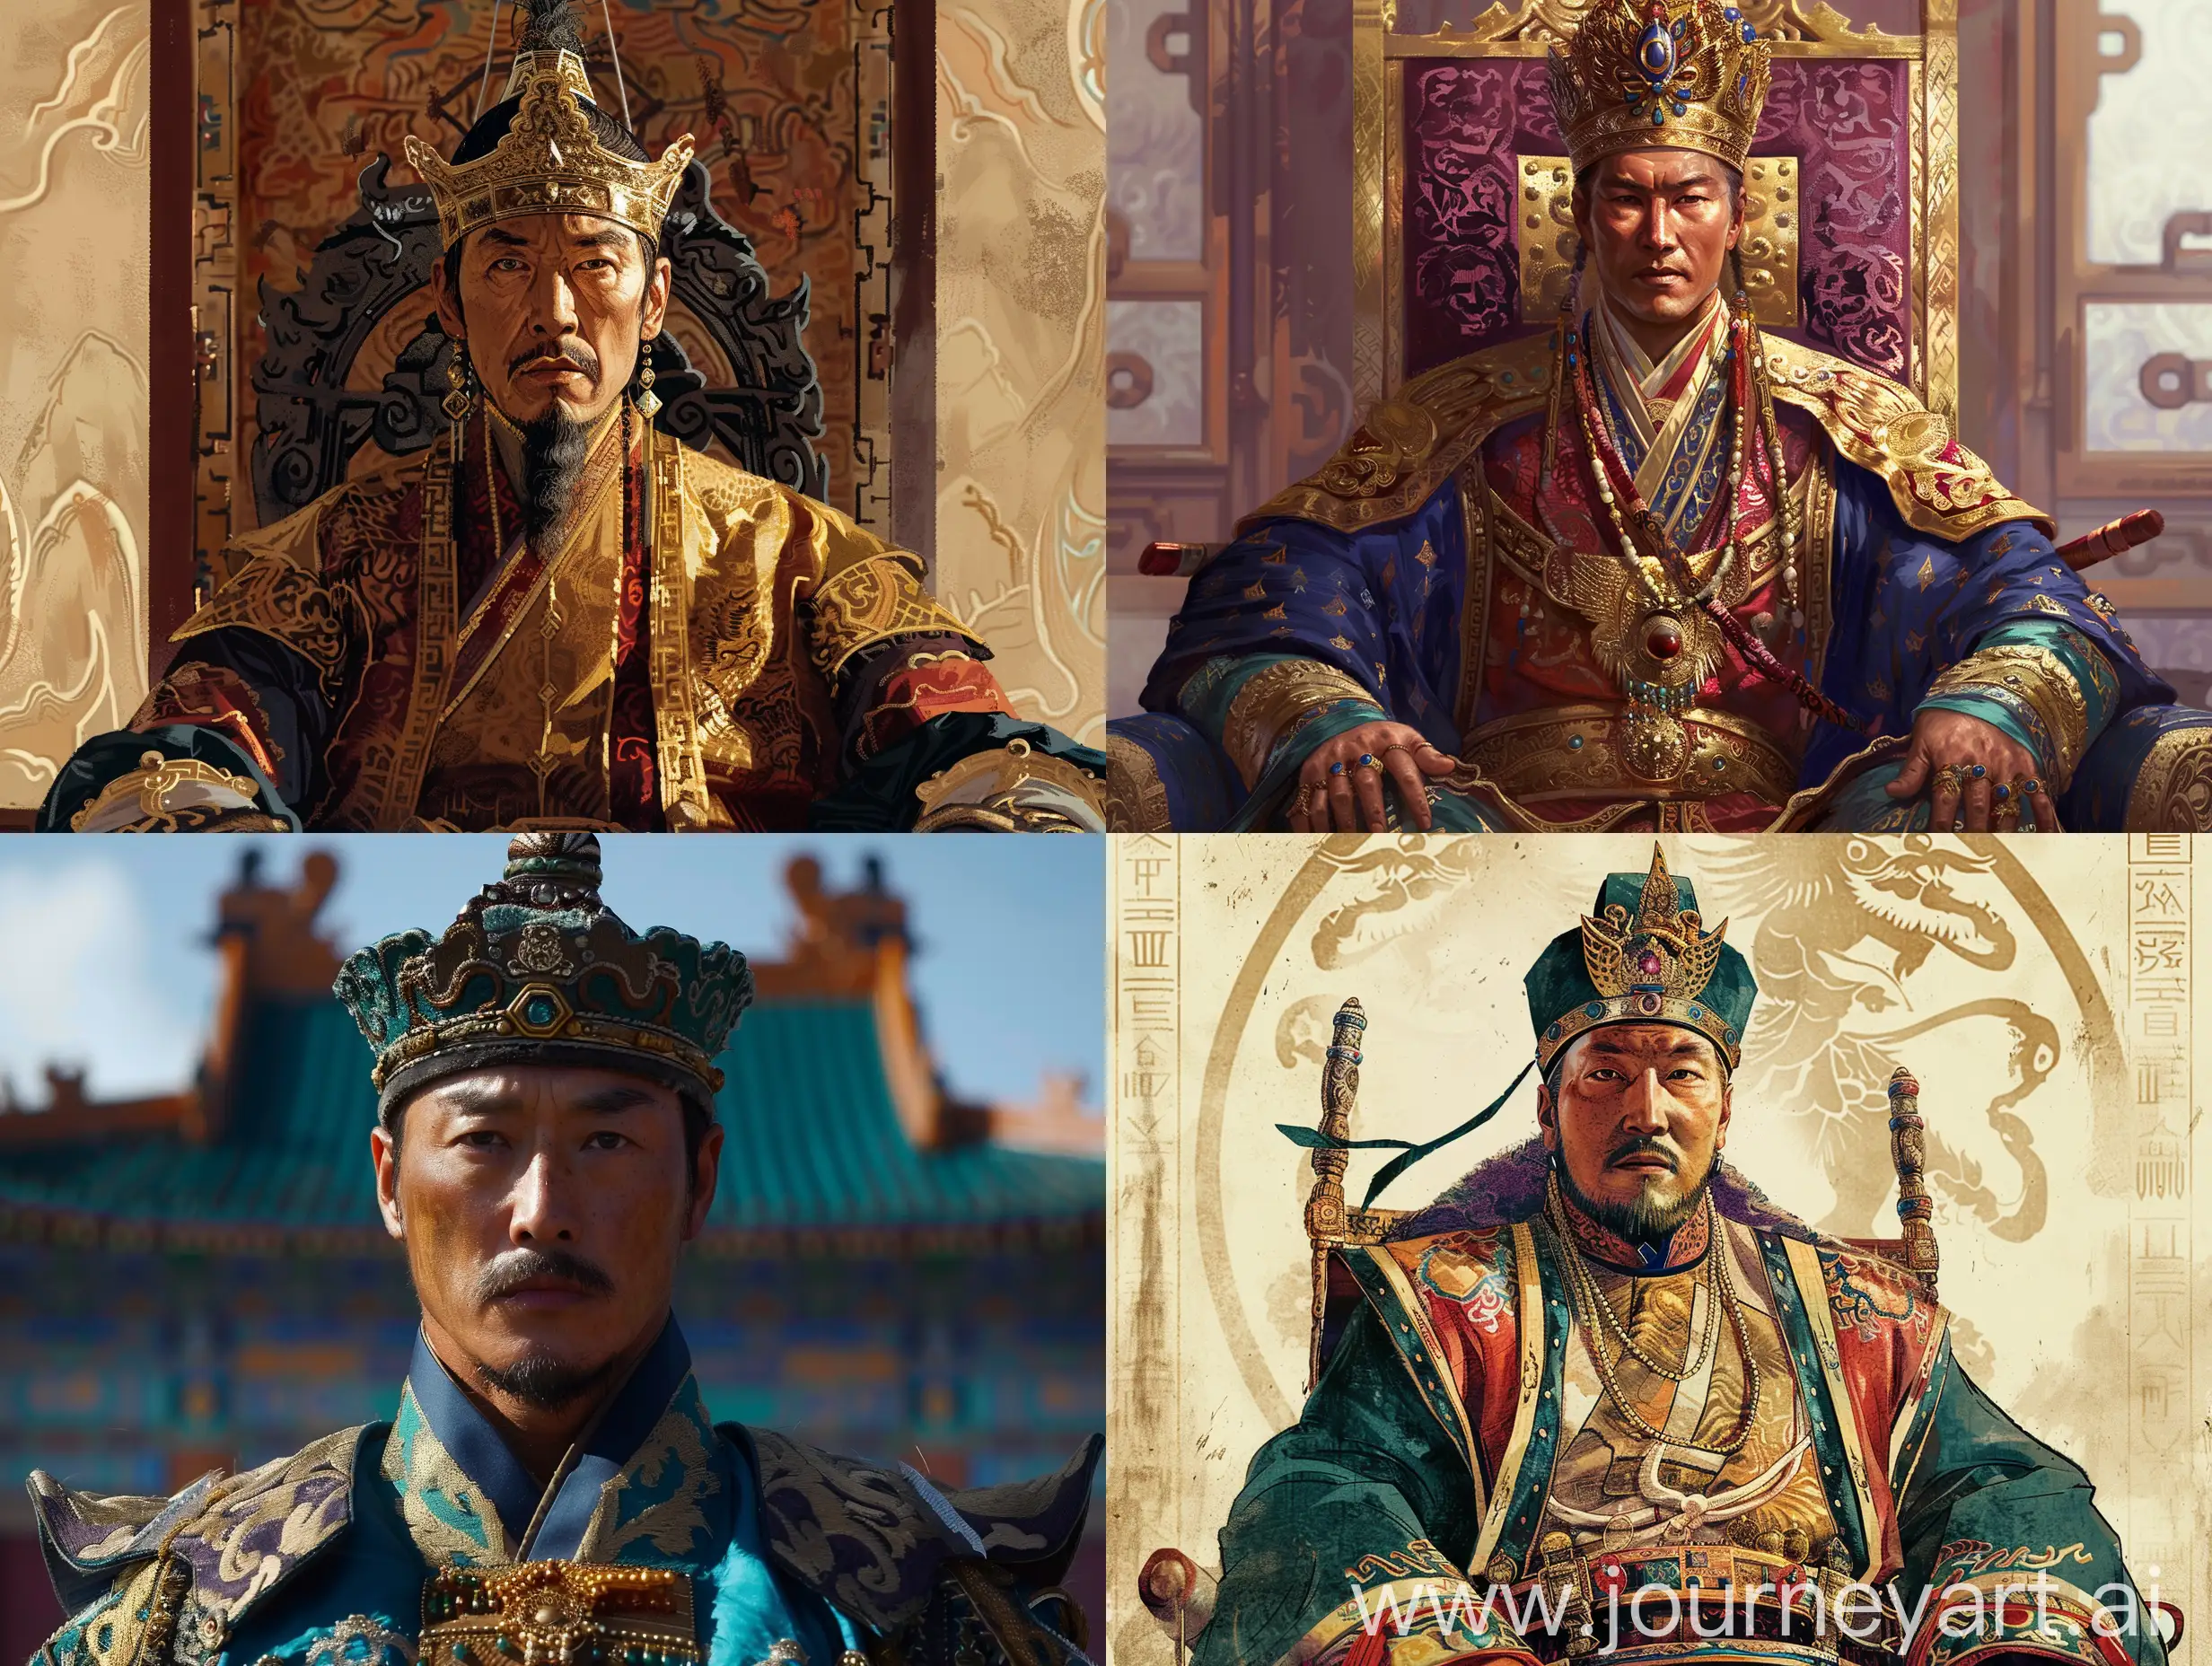 Jinong means "Crown Prince" and is the heir apparent to the Mongolian Great Khan. As heir to the throne, Jinong has an important role in administration and ceremonial events.